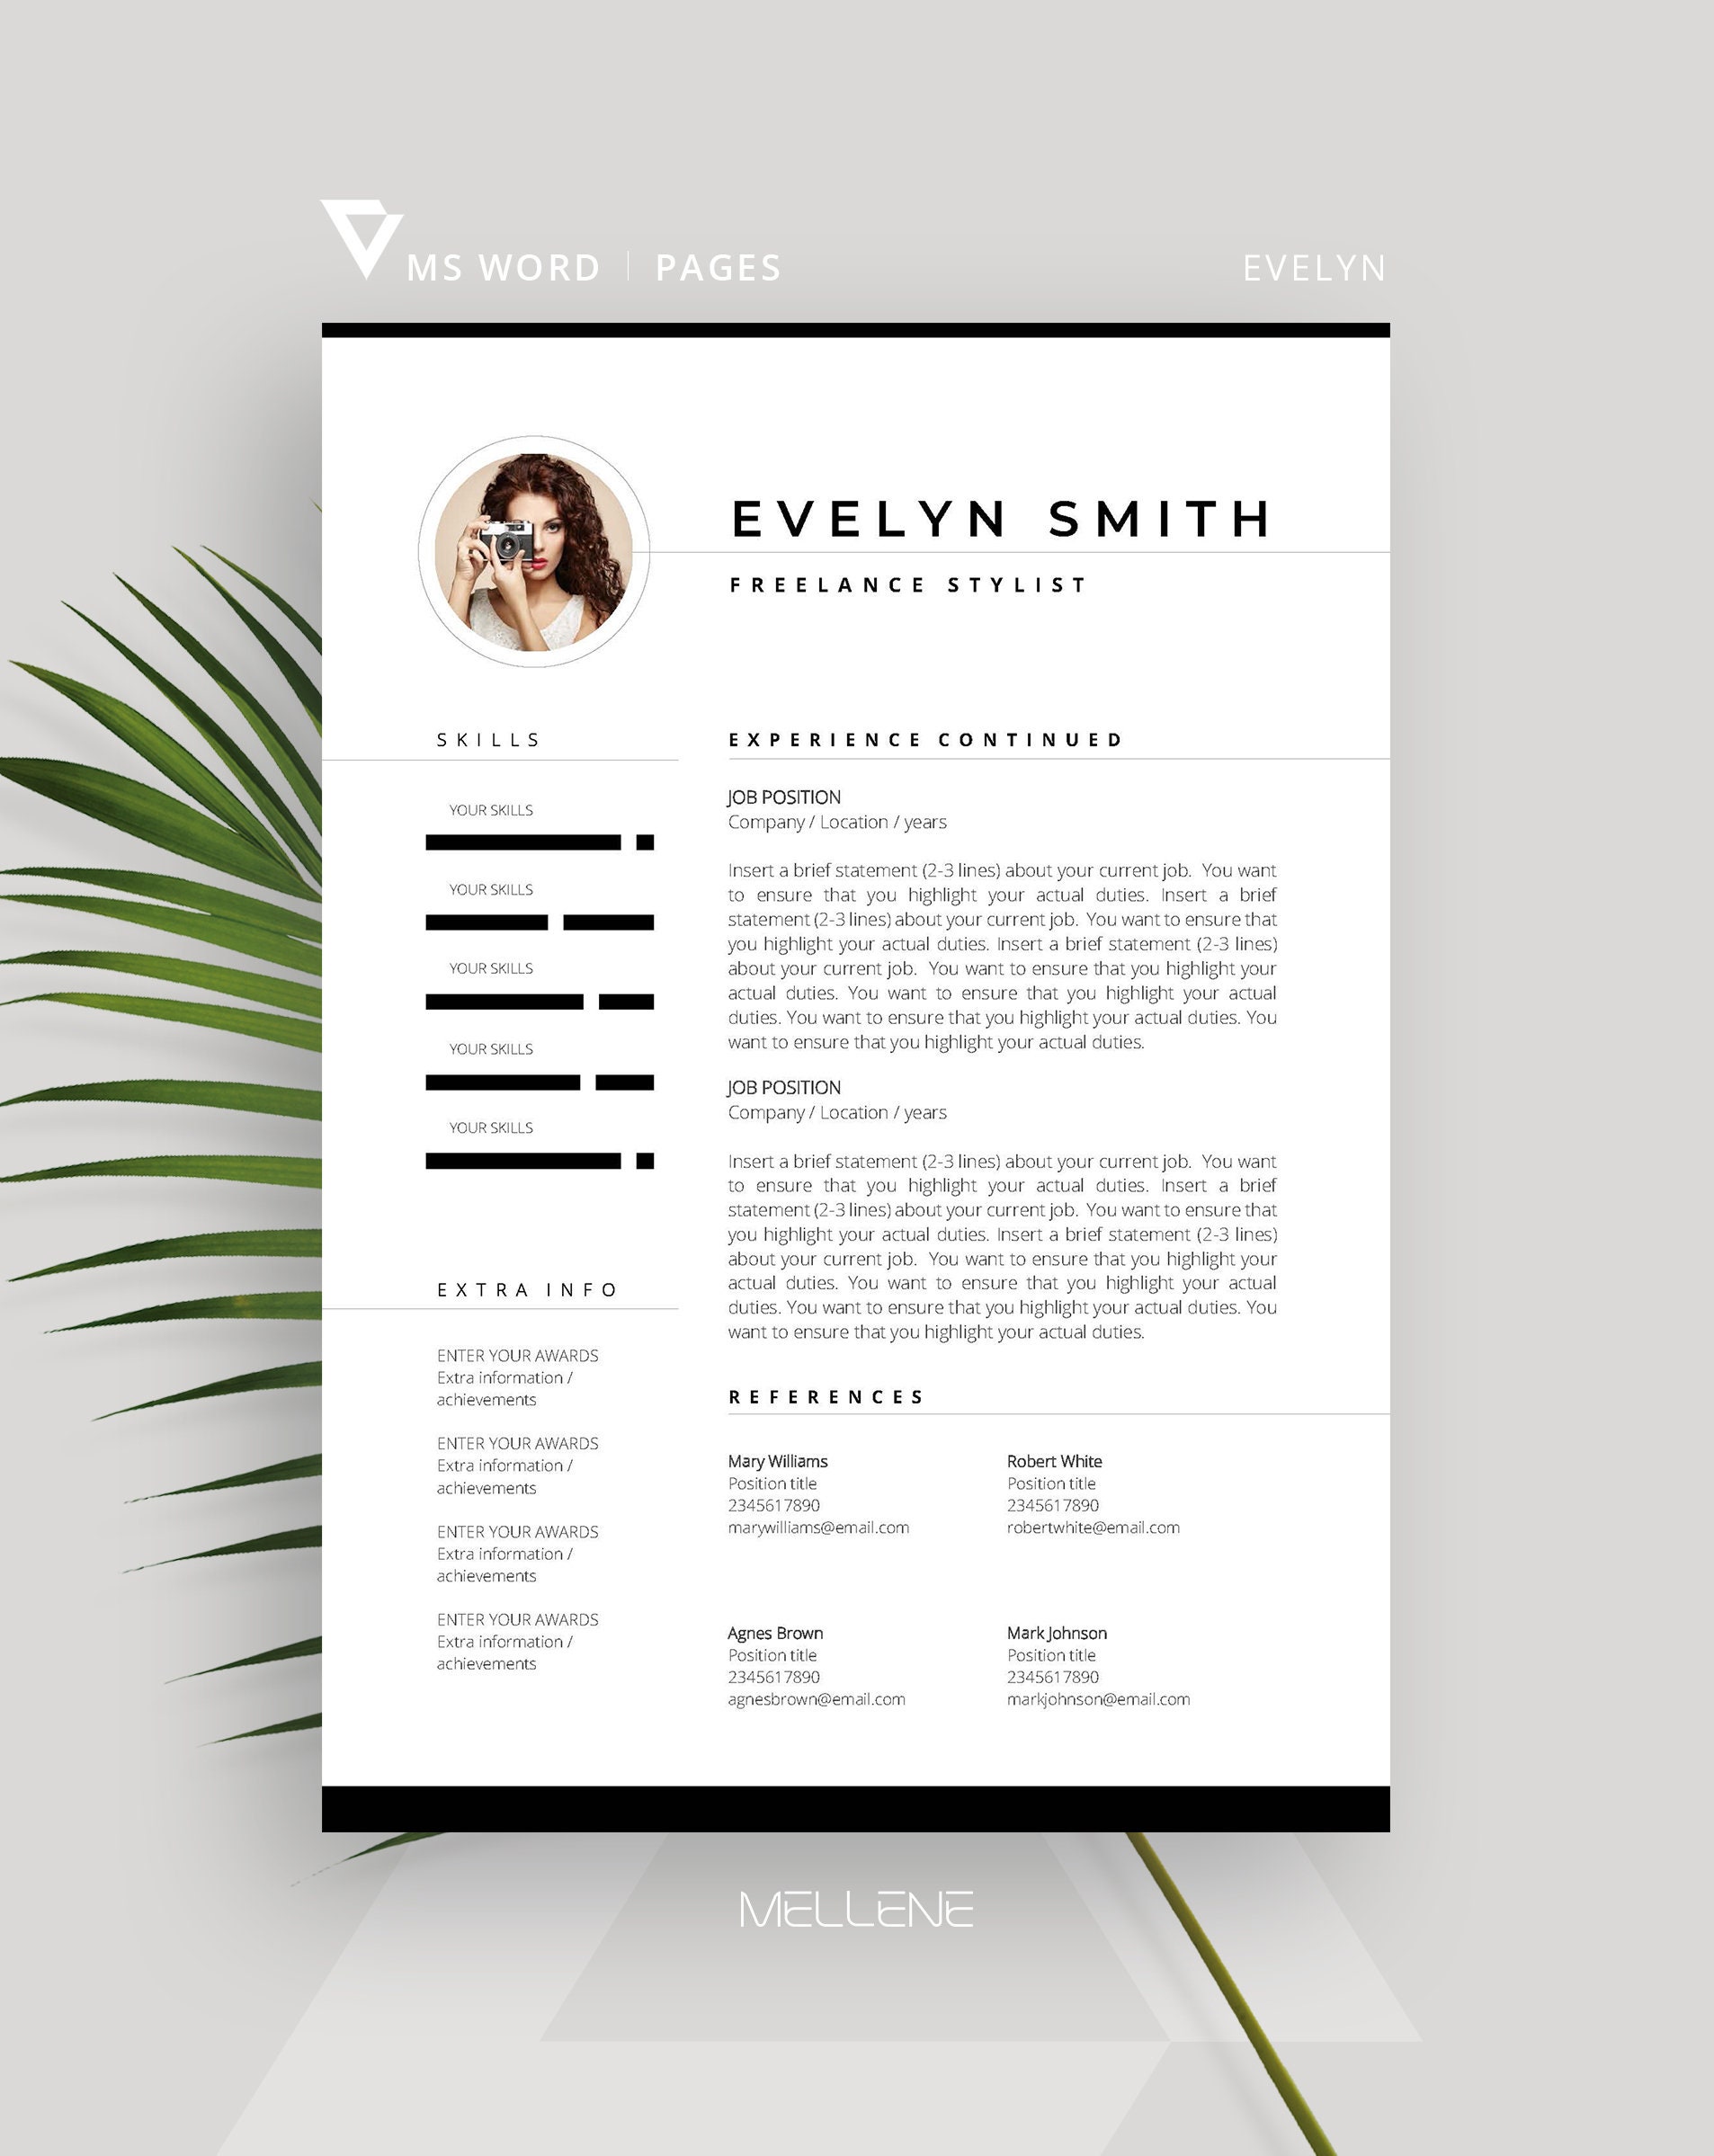 Personal Shopper Resume - Download in Word, Apple Pages